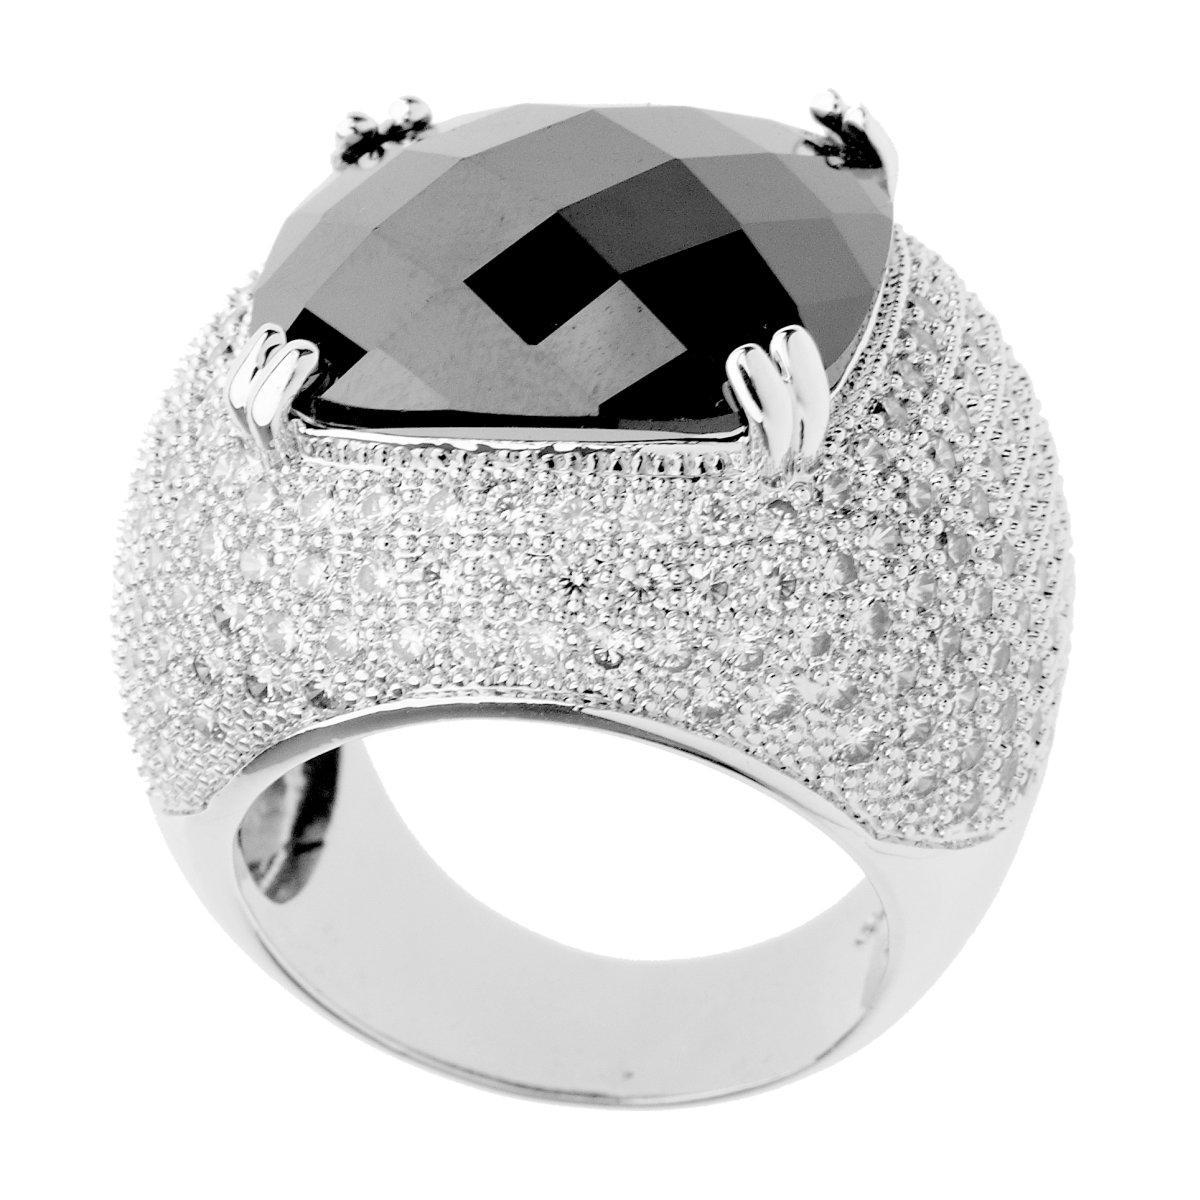 Iced Out Bling Micro Pave Ring - ROSE CUT Zirconia